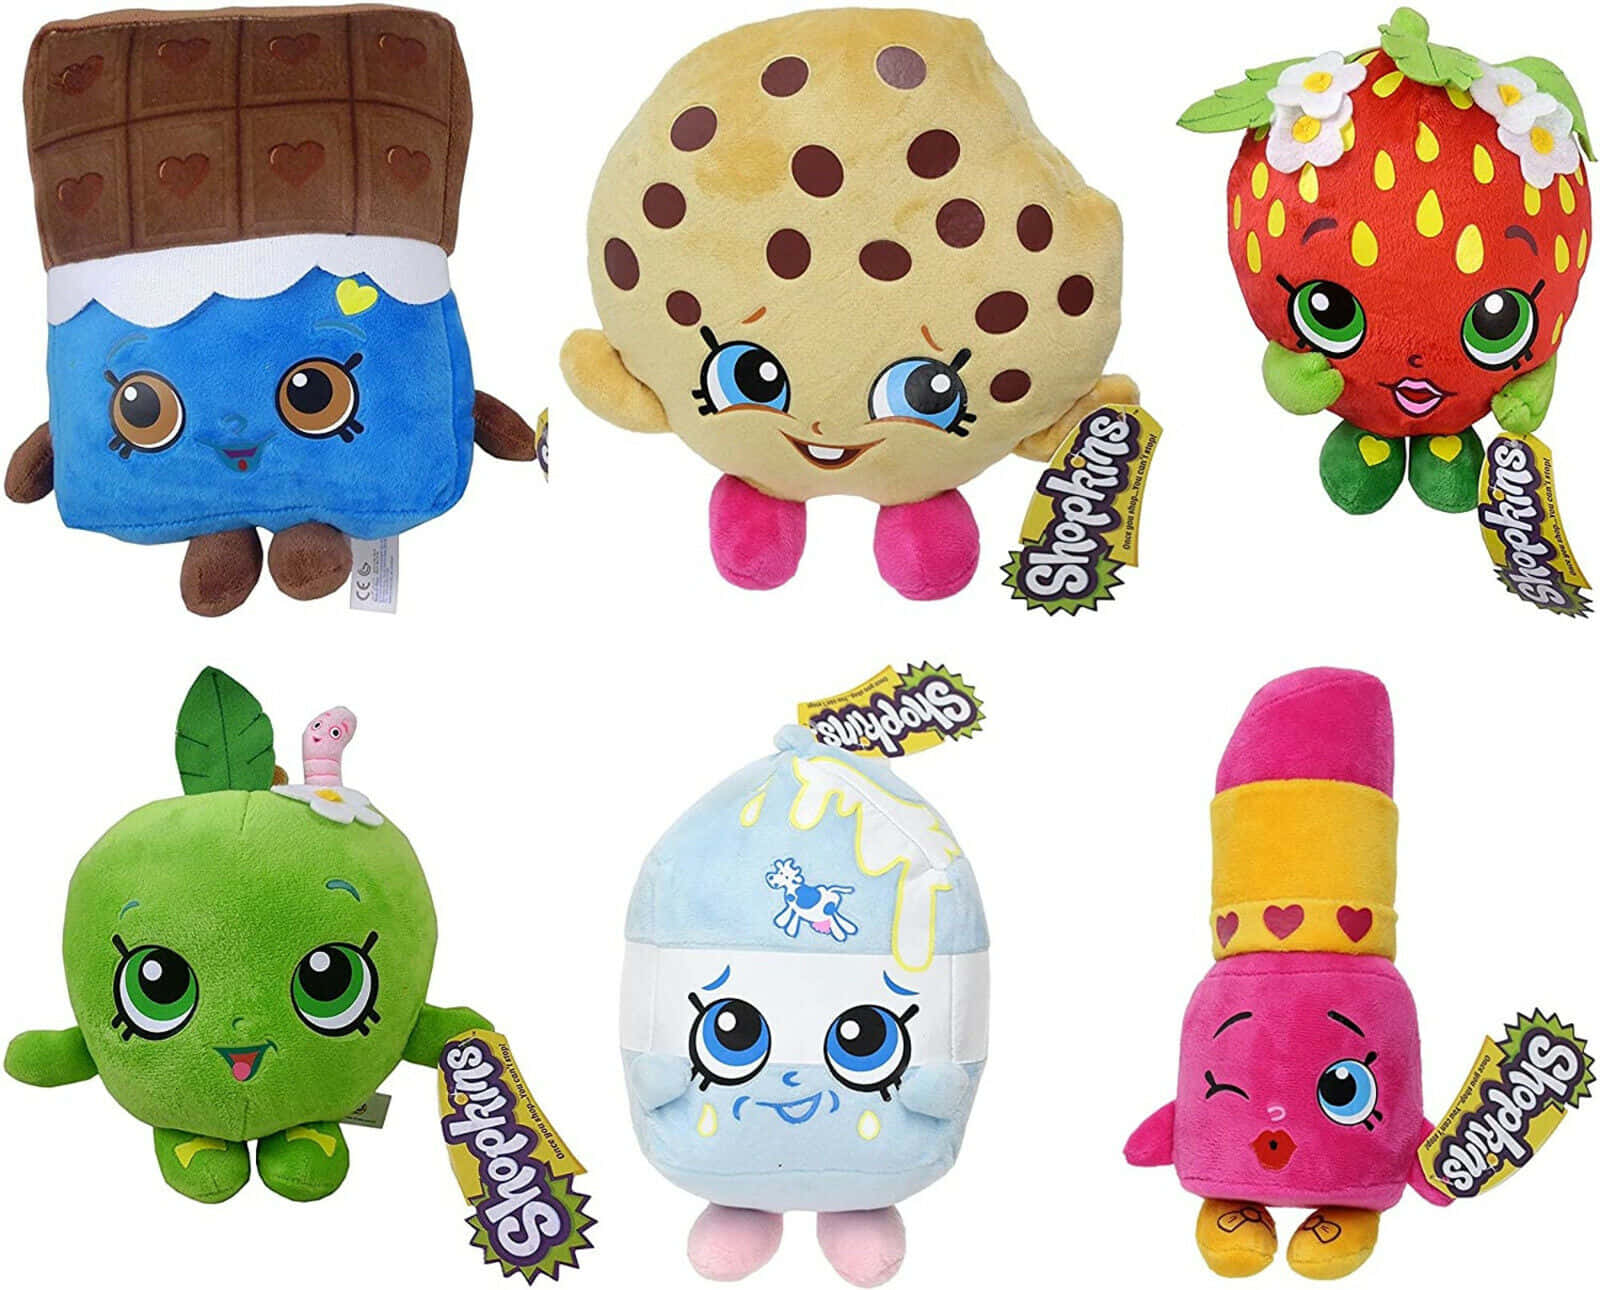 A colorful Shopkins collection showcasing delightful characters and fun accessories